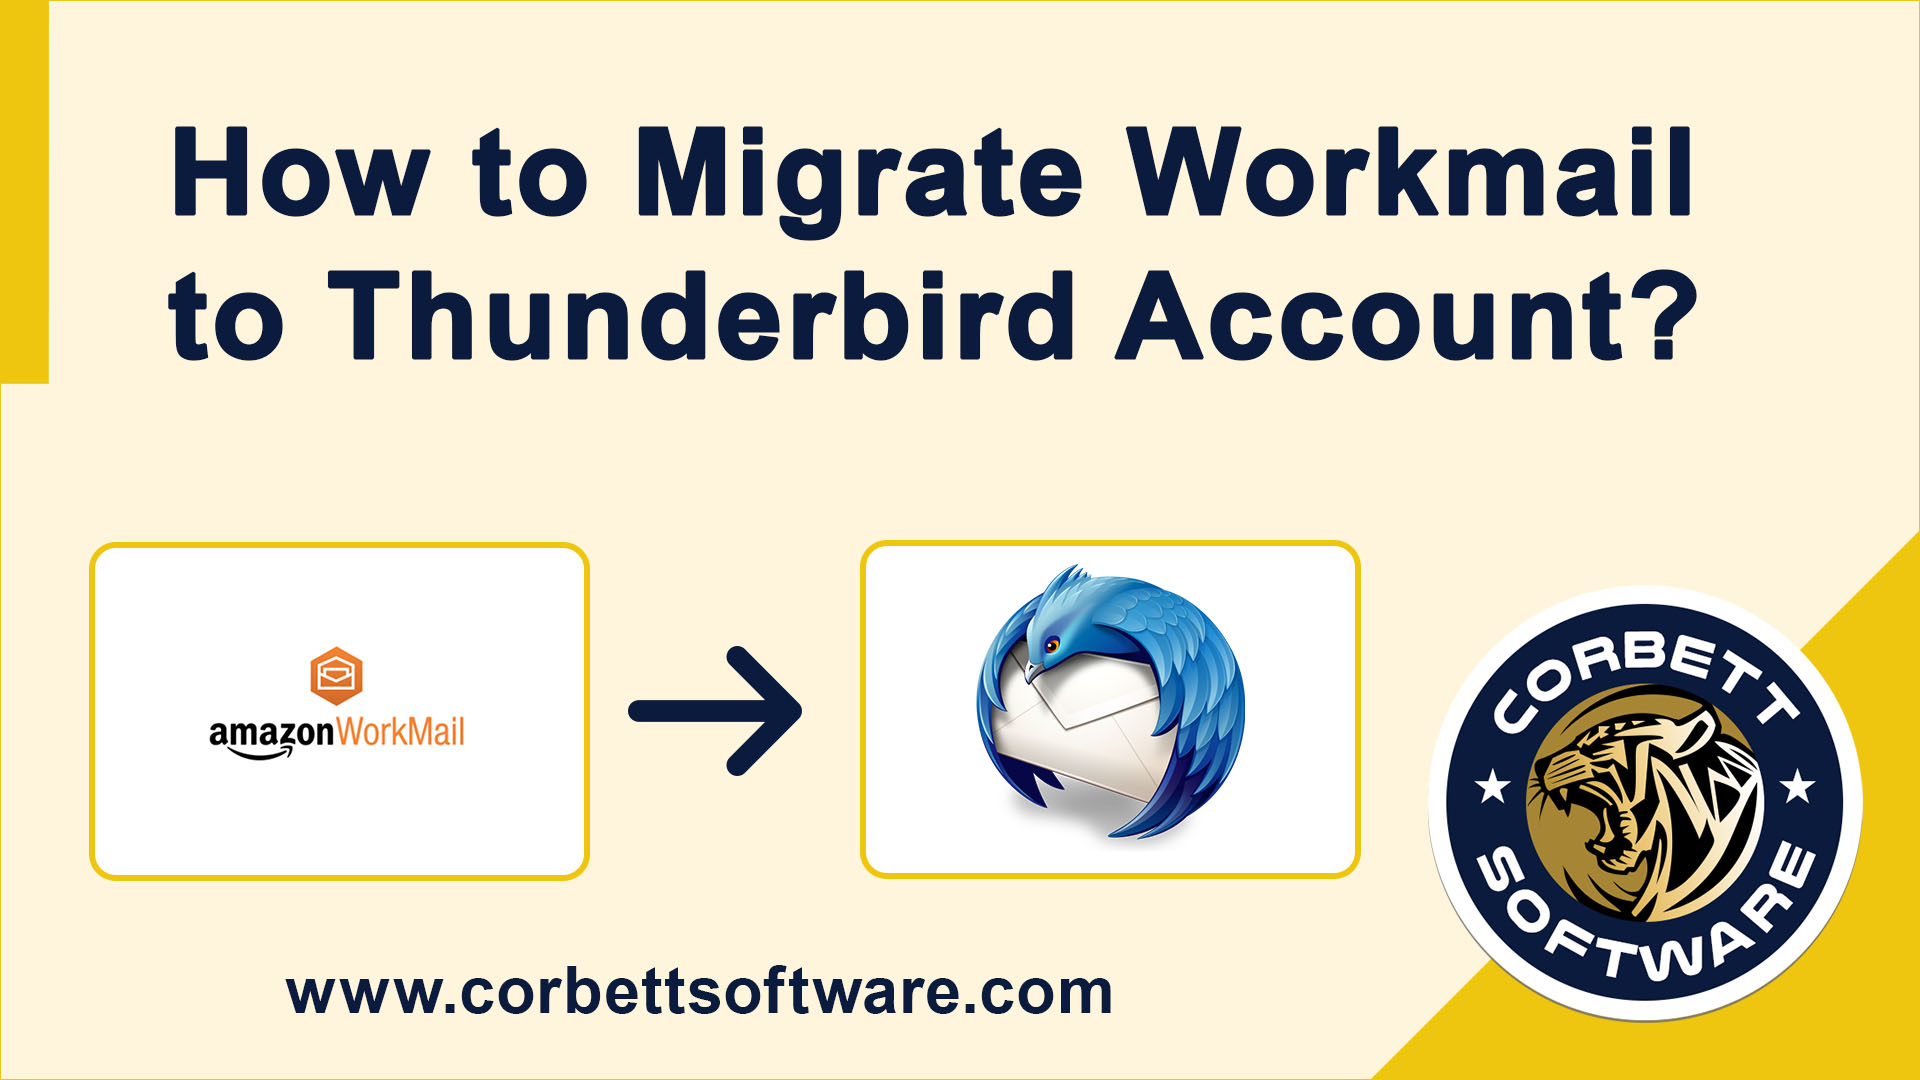 Migrate Workmail to Thunderbird